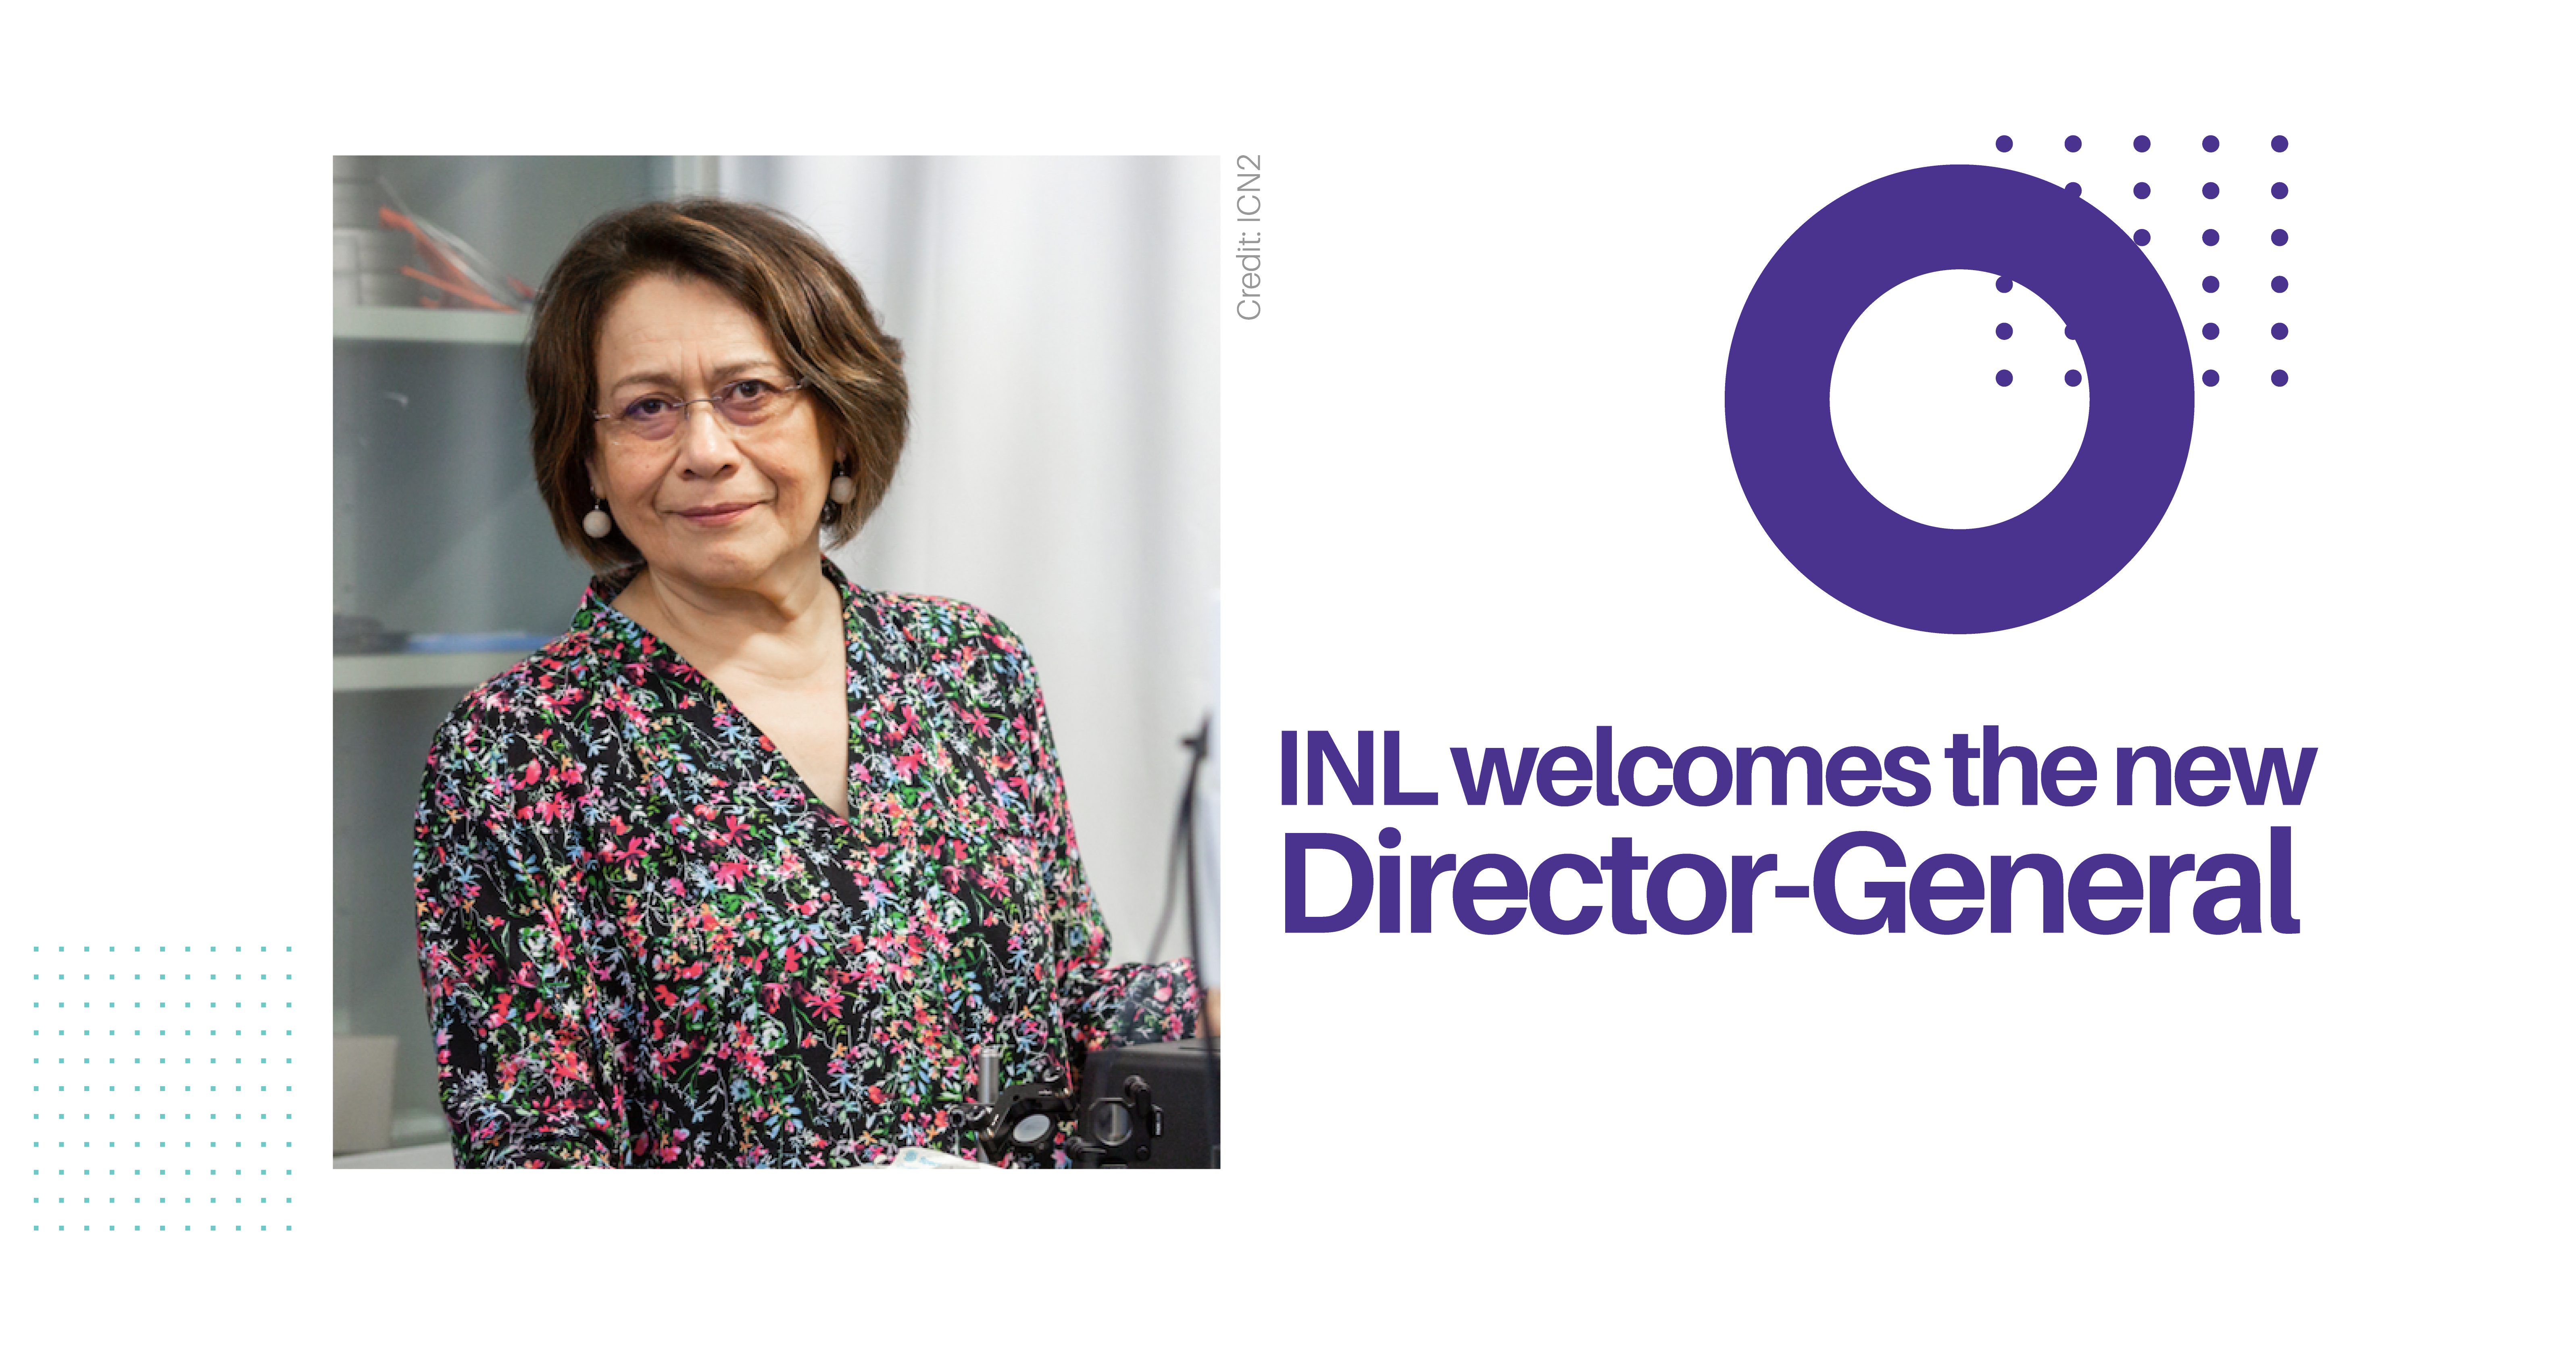 Professor Clivia M. Sotomayor Torres appointed to be the new Director General of INL